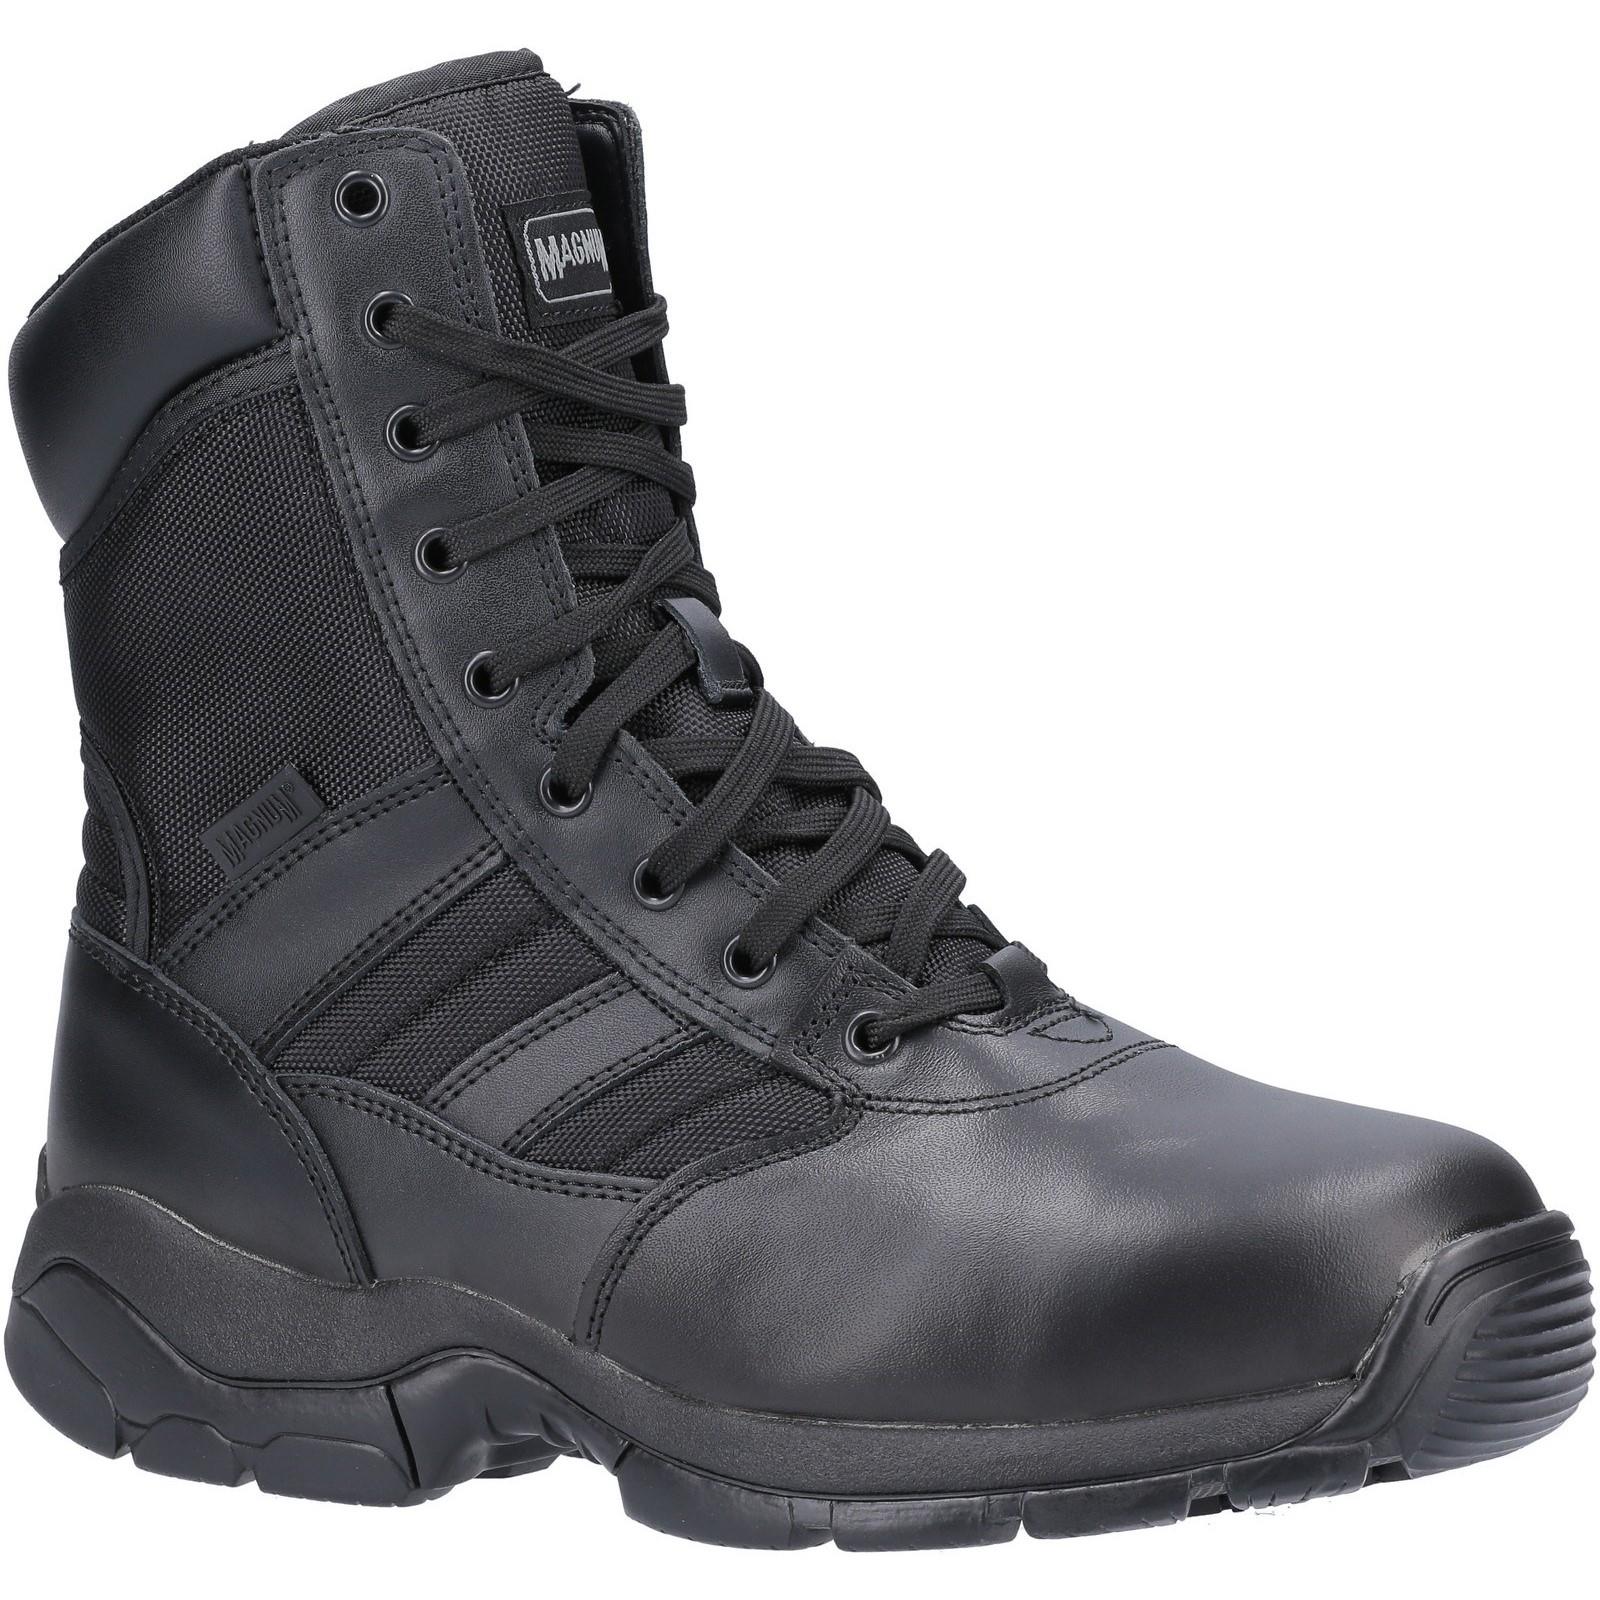 Magnum Panther SB black 8" combat security steel toe work safety boots #M800173